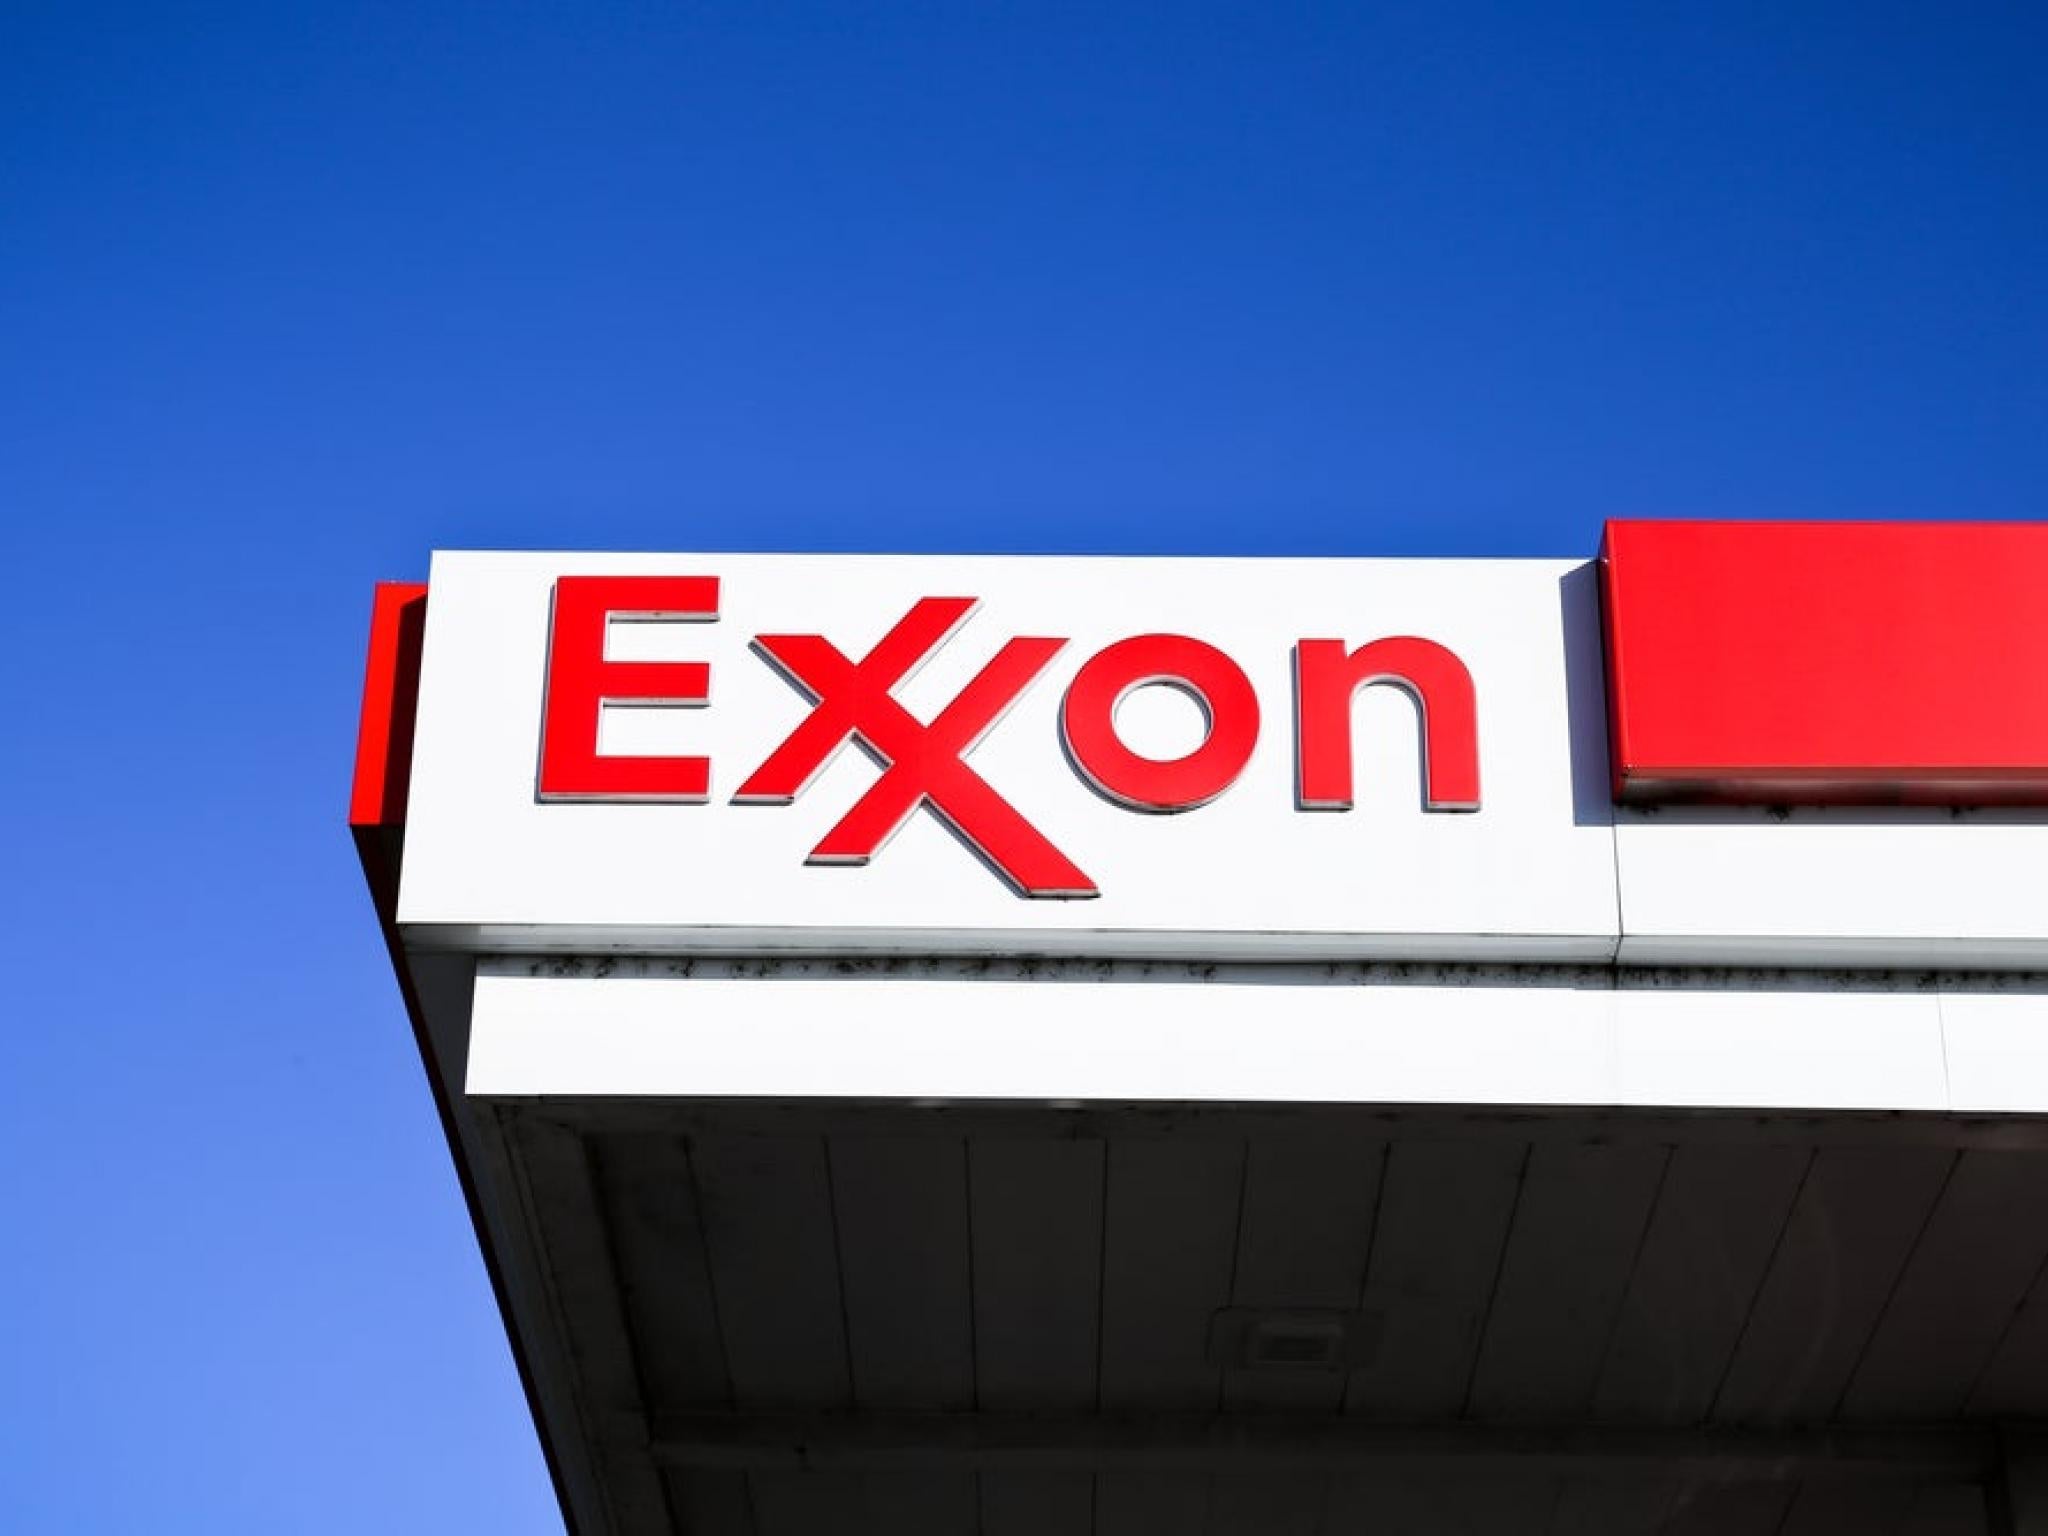  2m-bet-on-exxon-mobil-check-out-these-3-stocks-insiders-are-buying 